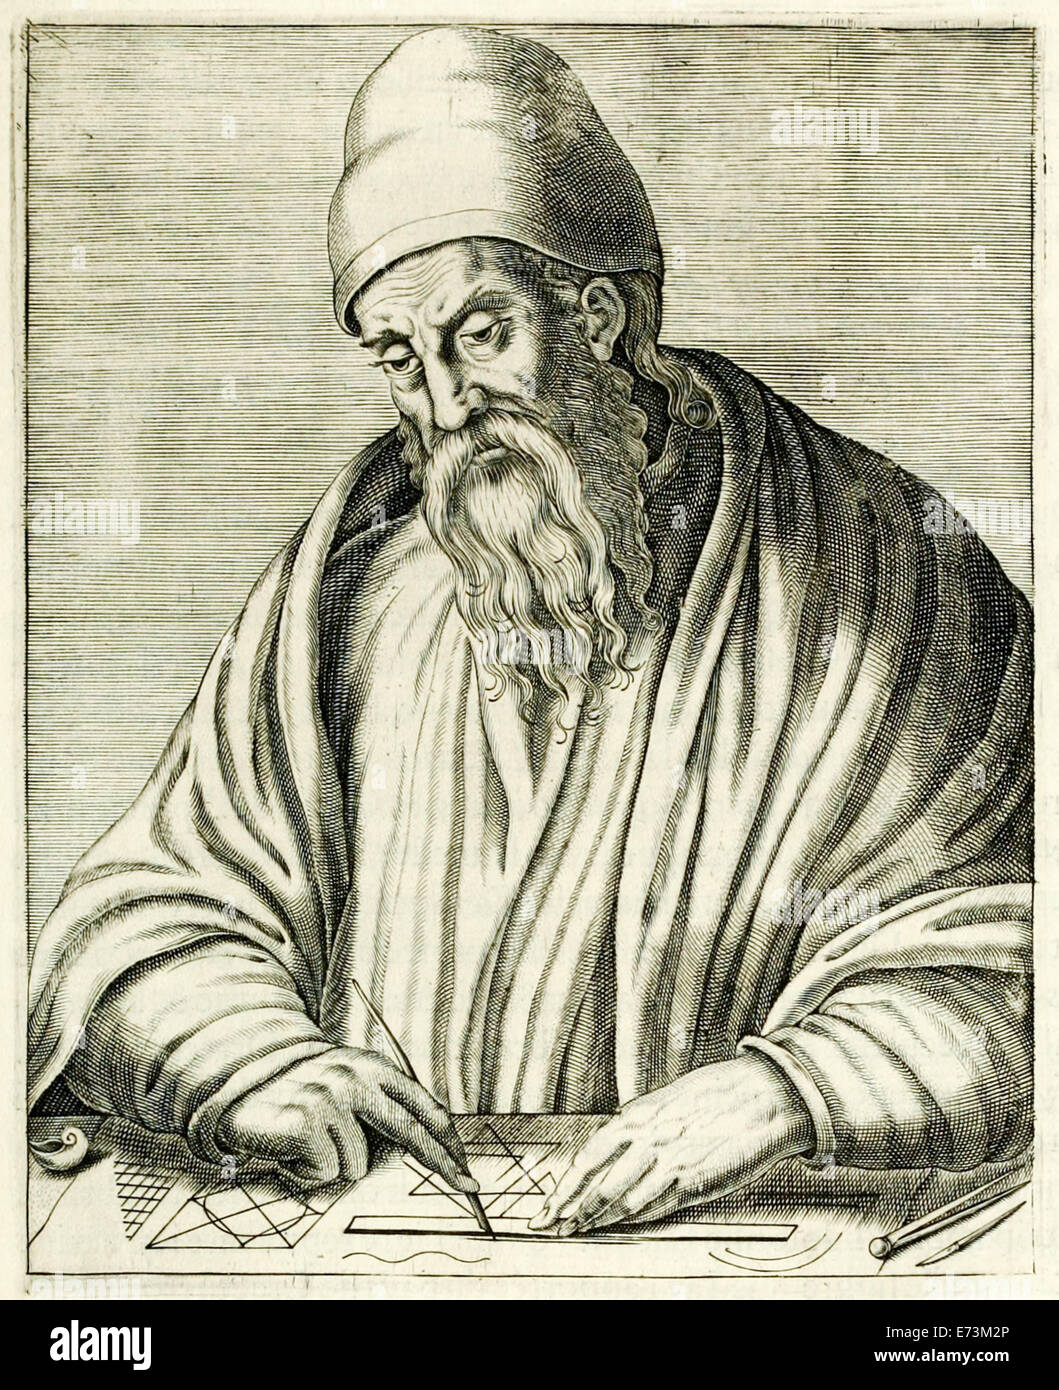 Euclid of Alexandria (450-350BC) Greek mathematician who wrote 'Elements' one of the most influential works in the history of mathematics. Engraving by Frère André Thévet (1516-1590) published in 1594. See description for more information. Stock Photo